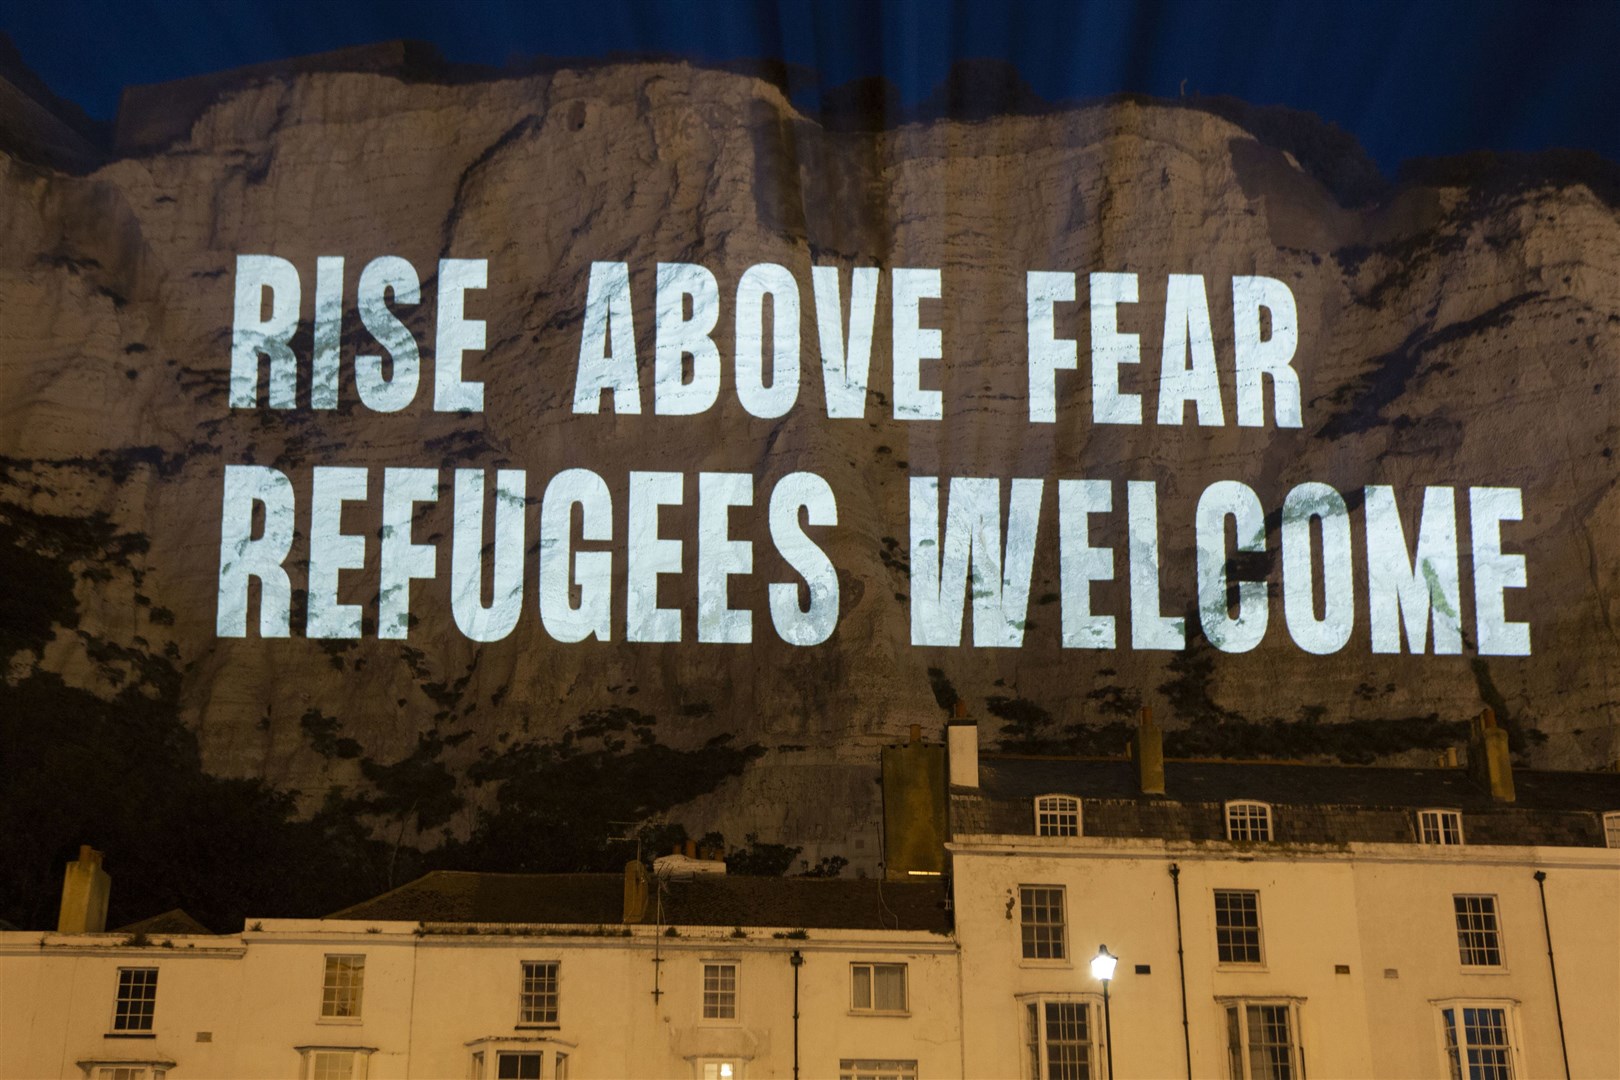 The projections were in support of migrant welfare (Freedom from Torture/POW/PA)